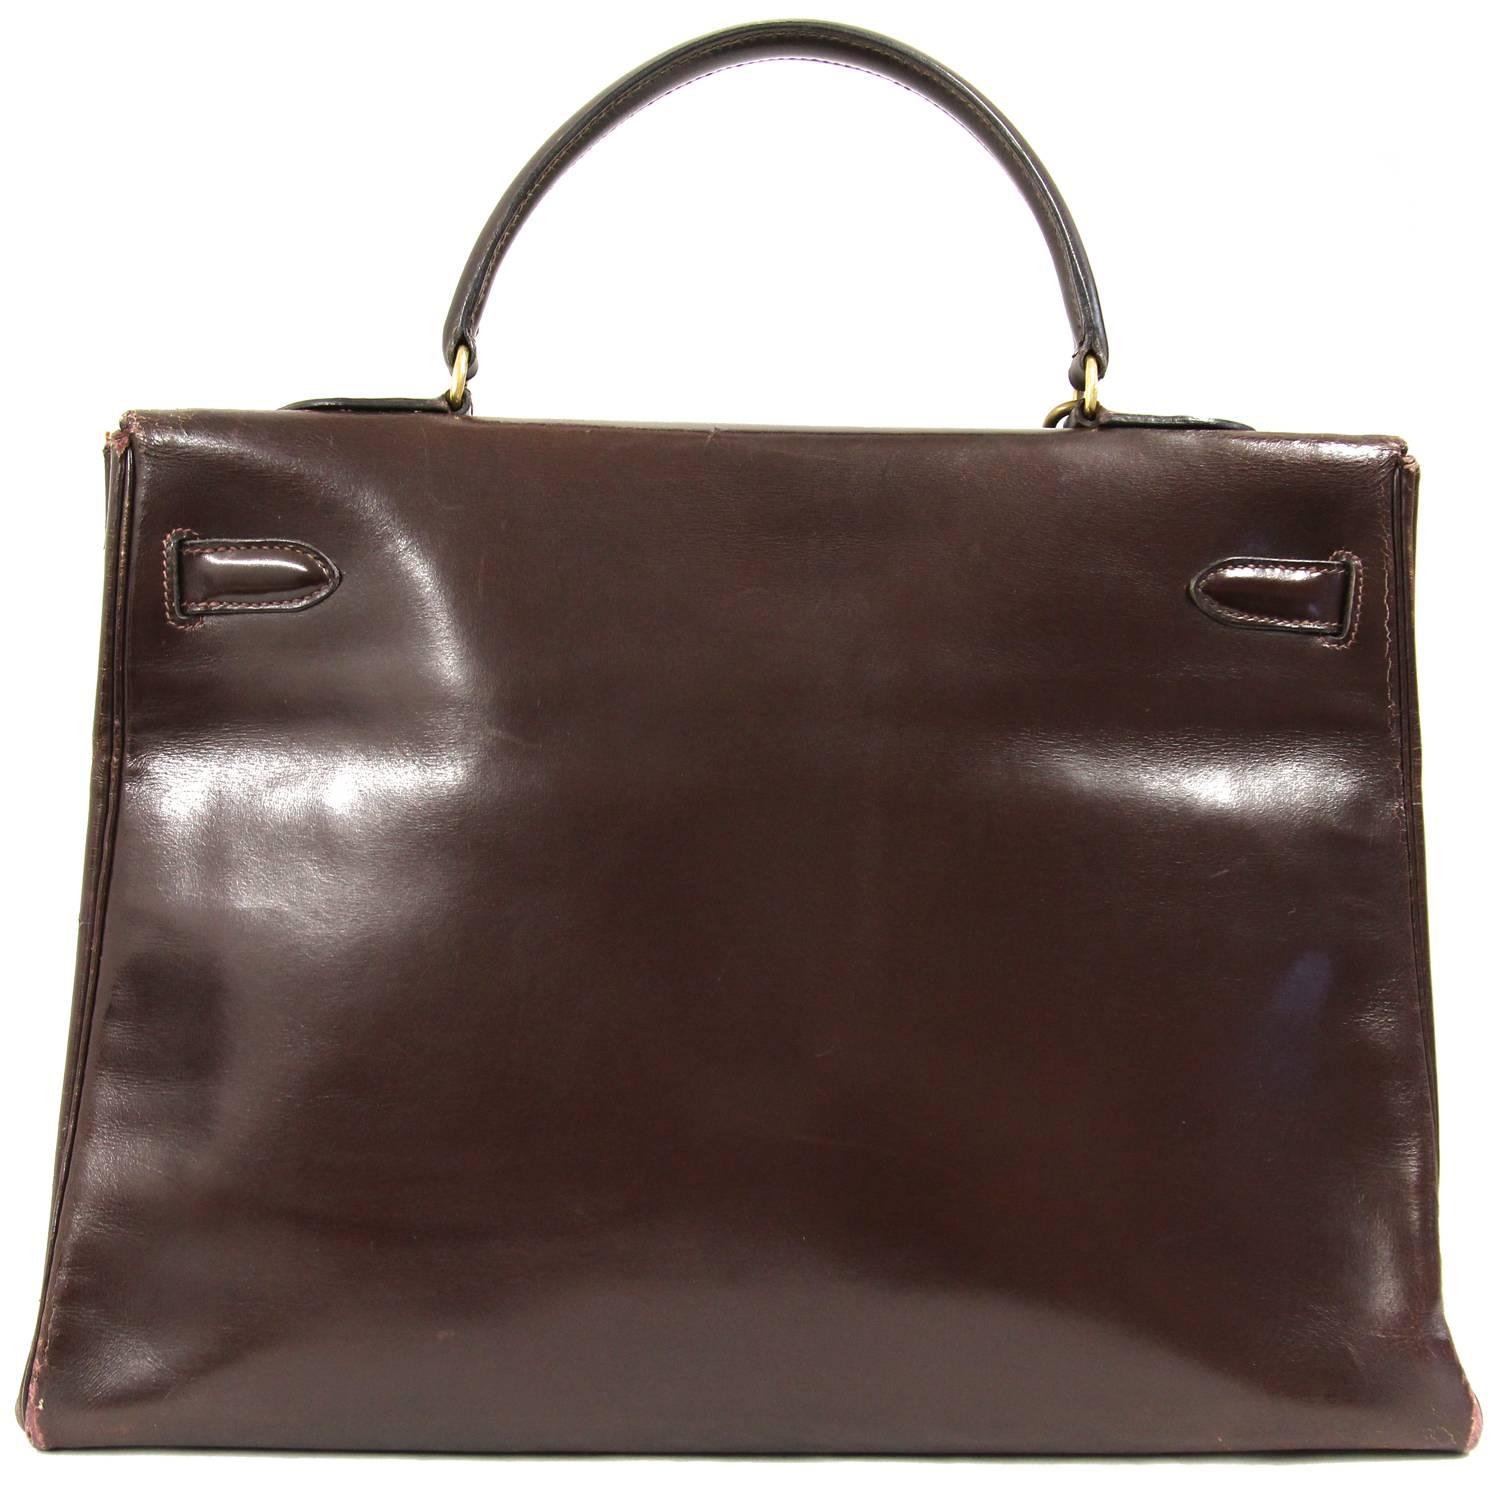 Hermès timeless Kelly bag 35 cm in brown chocolate color. According to the code the item was produced in 1966 (cod. V) and comes with padlock, keys and clochette. Since it is vintage, it shows some scratches and lot of signs of utilization,